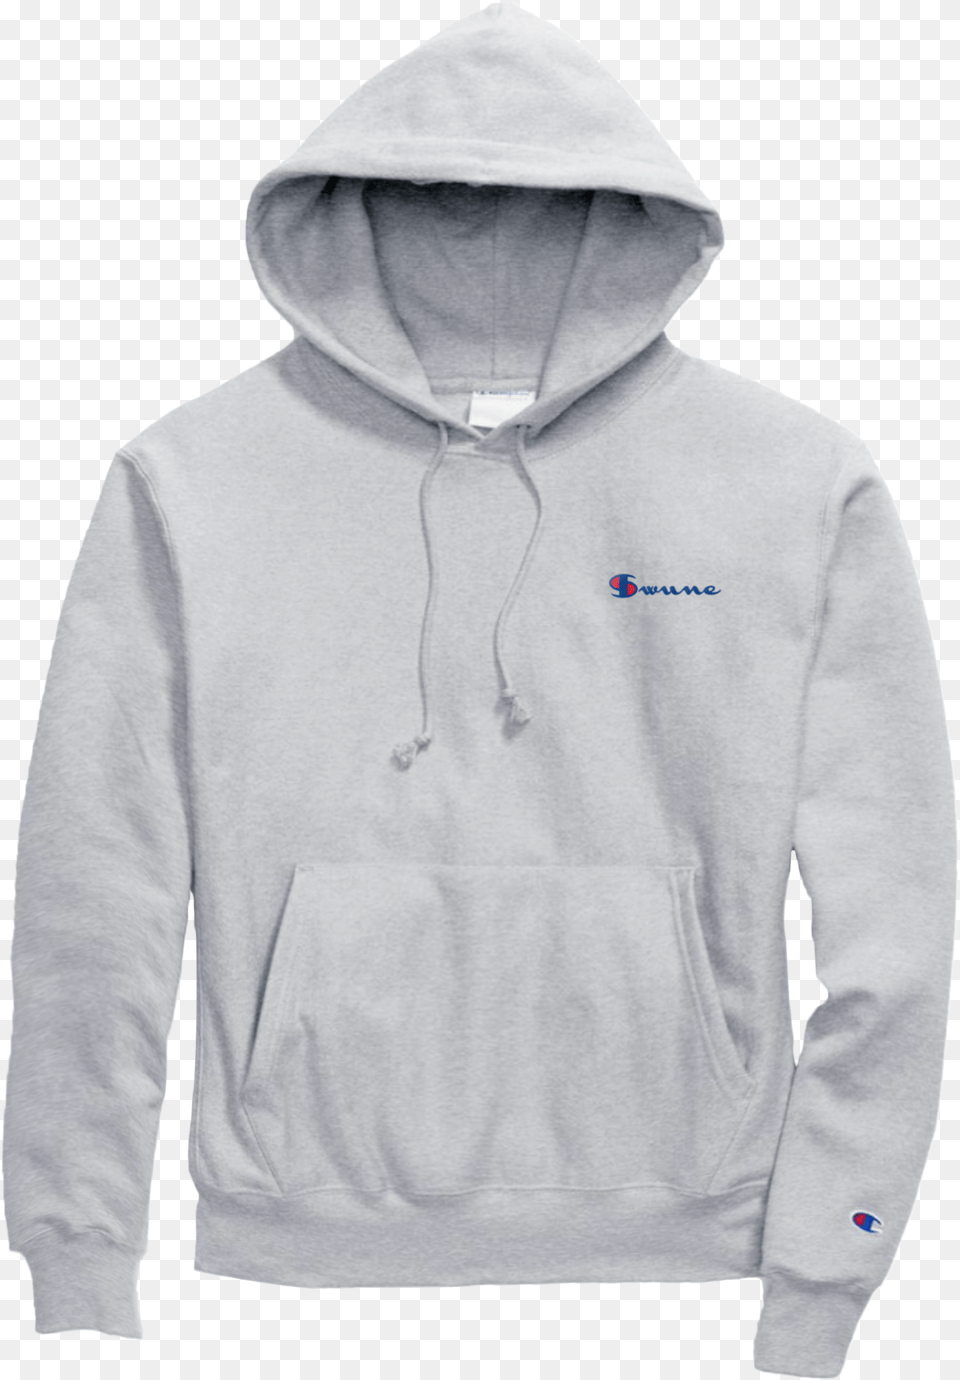 Champion Hoodie Gold Champion Hoodie Womens, Clothing, Hood, Knitwear, Sweater Png